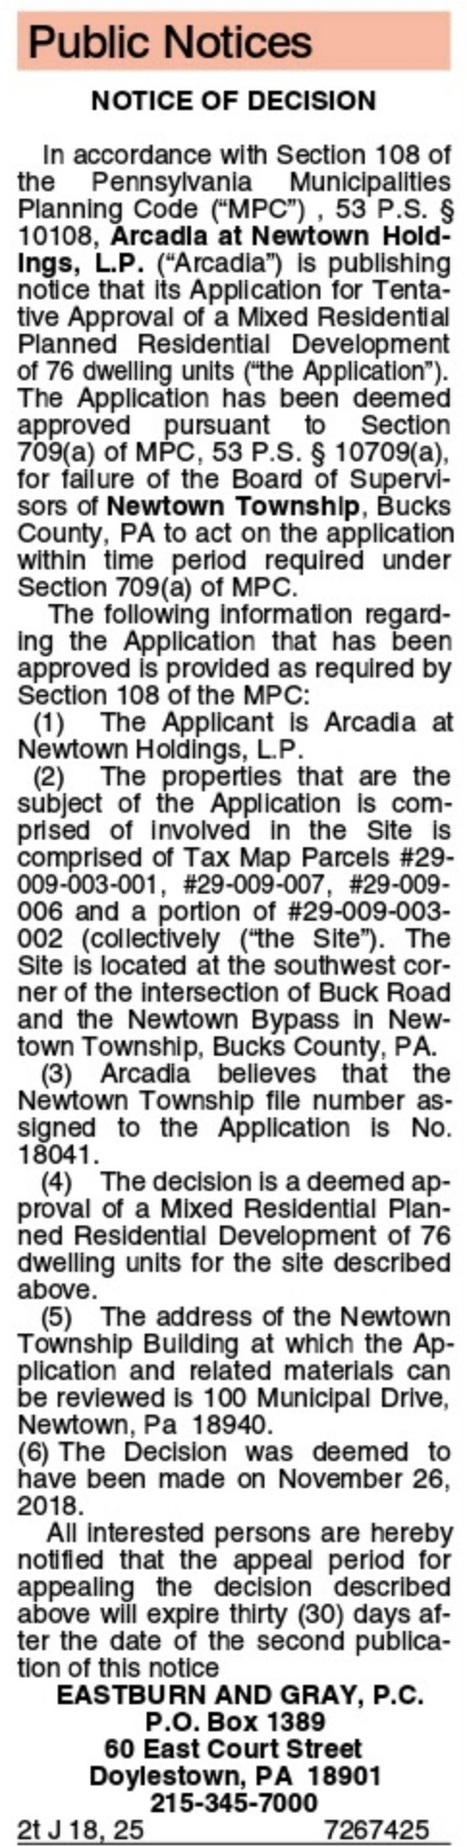 Arcadia at Newtown Claims Its 3rd PRD "Has Been Deemed Approved" Because of Failure of Timely Action By Board of Supervisors. Newtown Solicitor Says It's a "Frivolous Claim" | Newtown News of Interest | Scoop.it